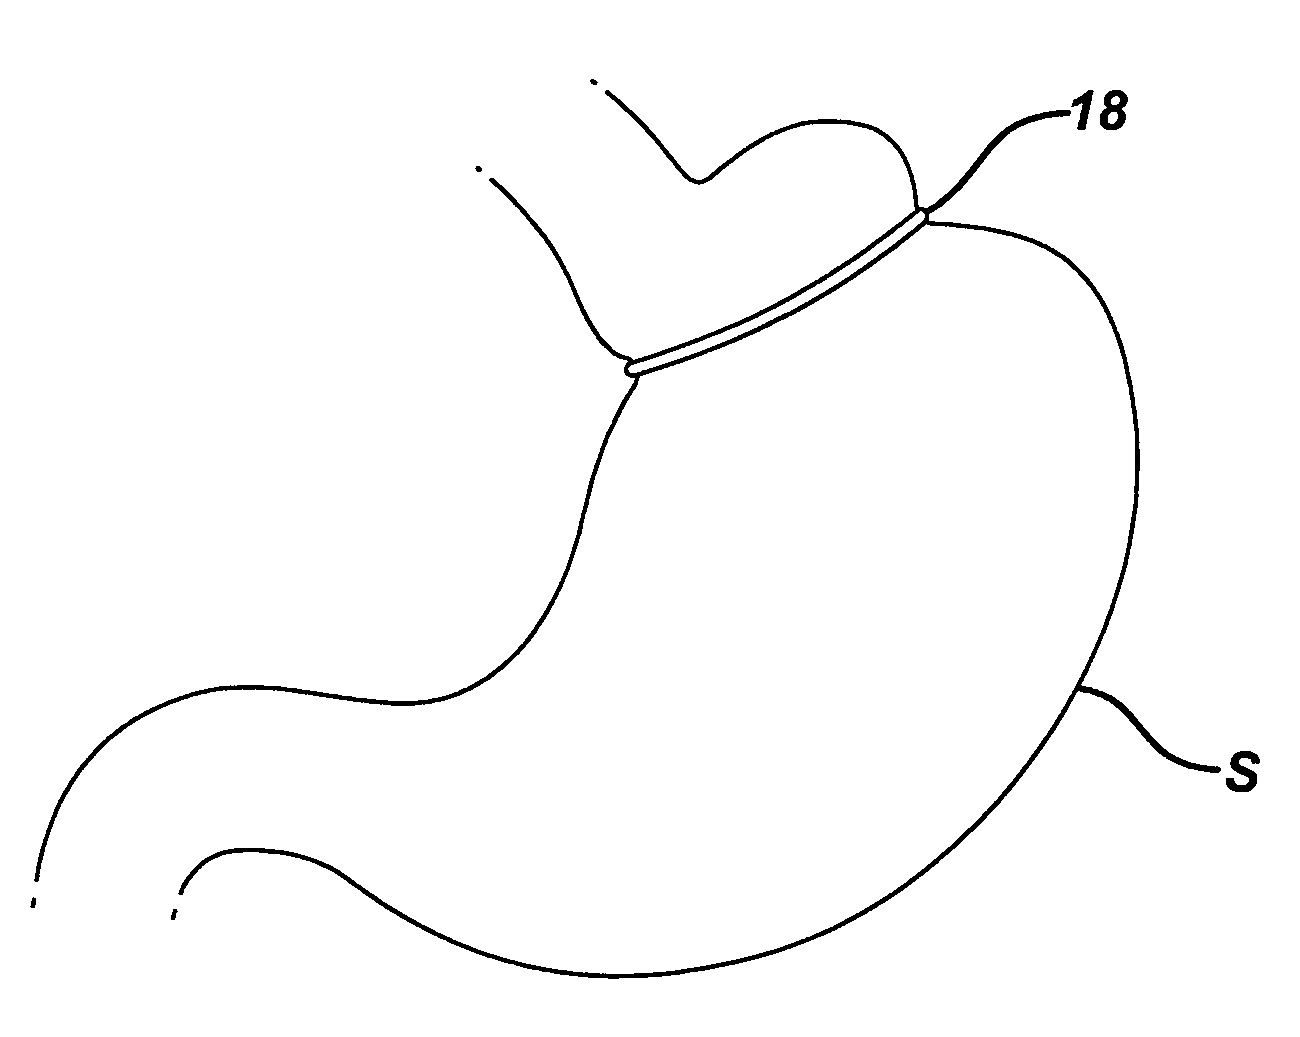 Methods and devices for placement of an intra-abdominal or intra-thoracic appliance through a natural body orifice